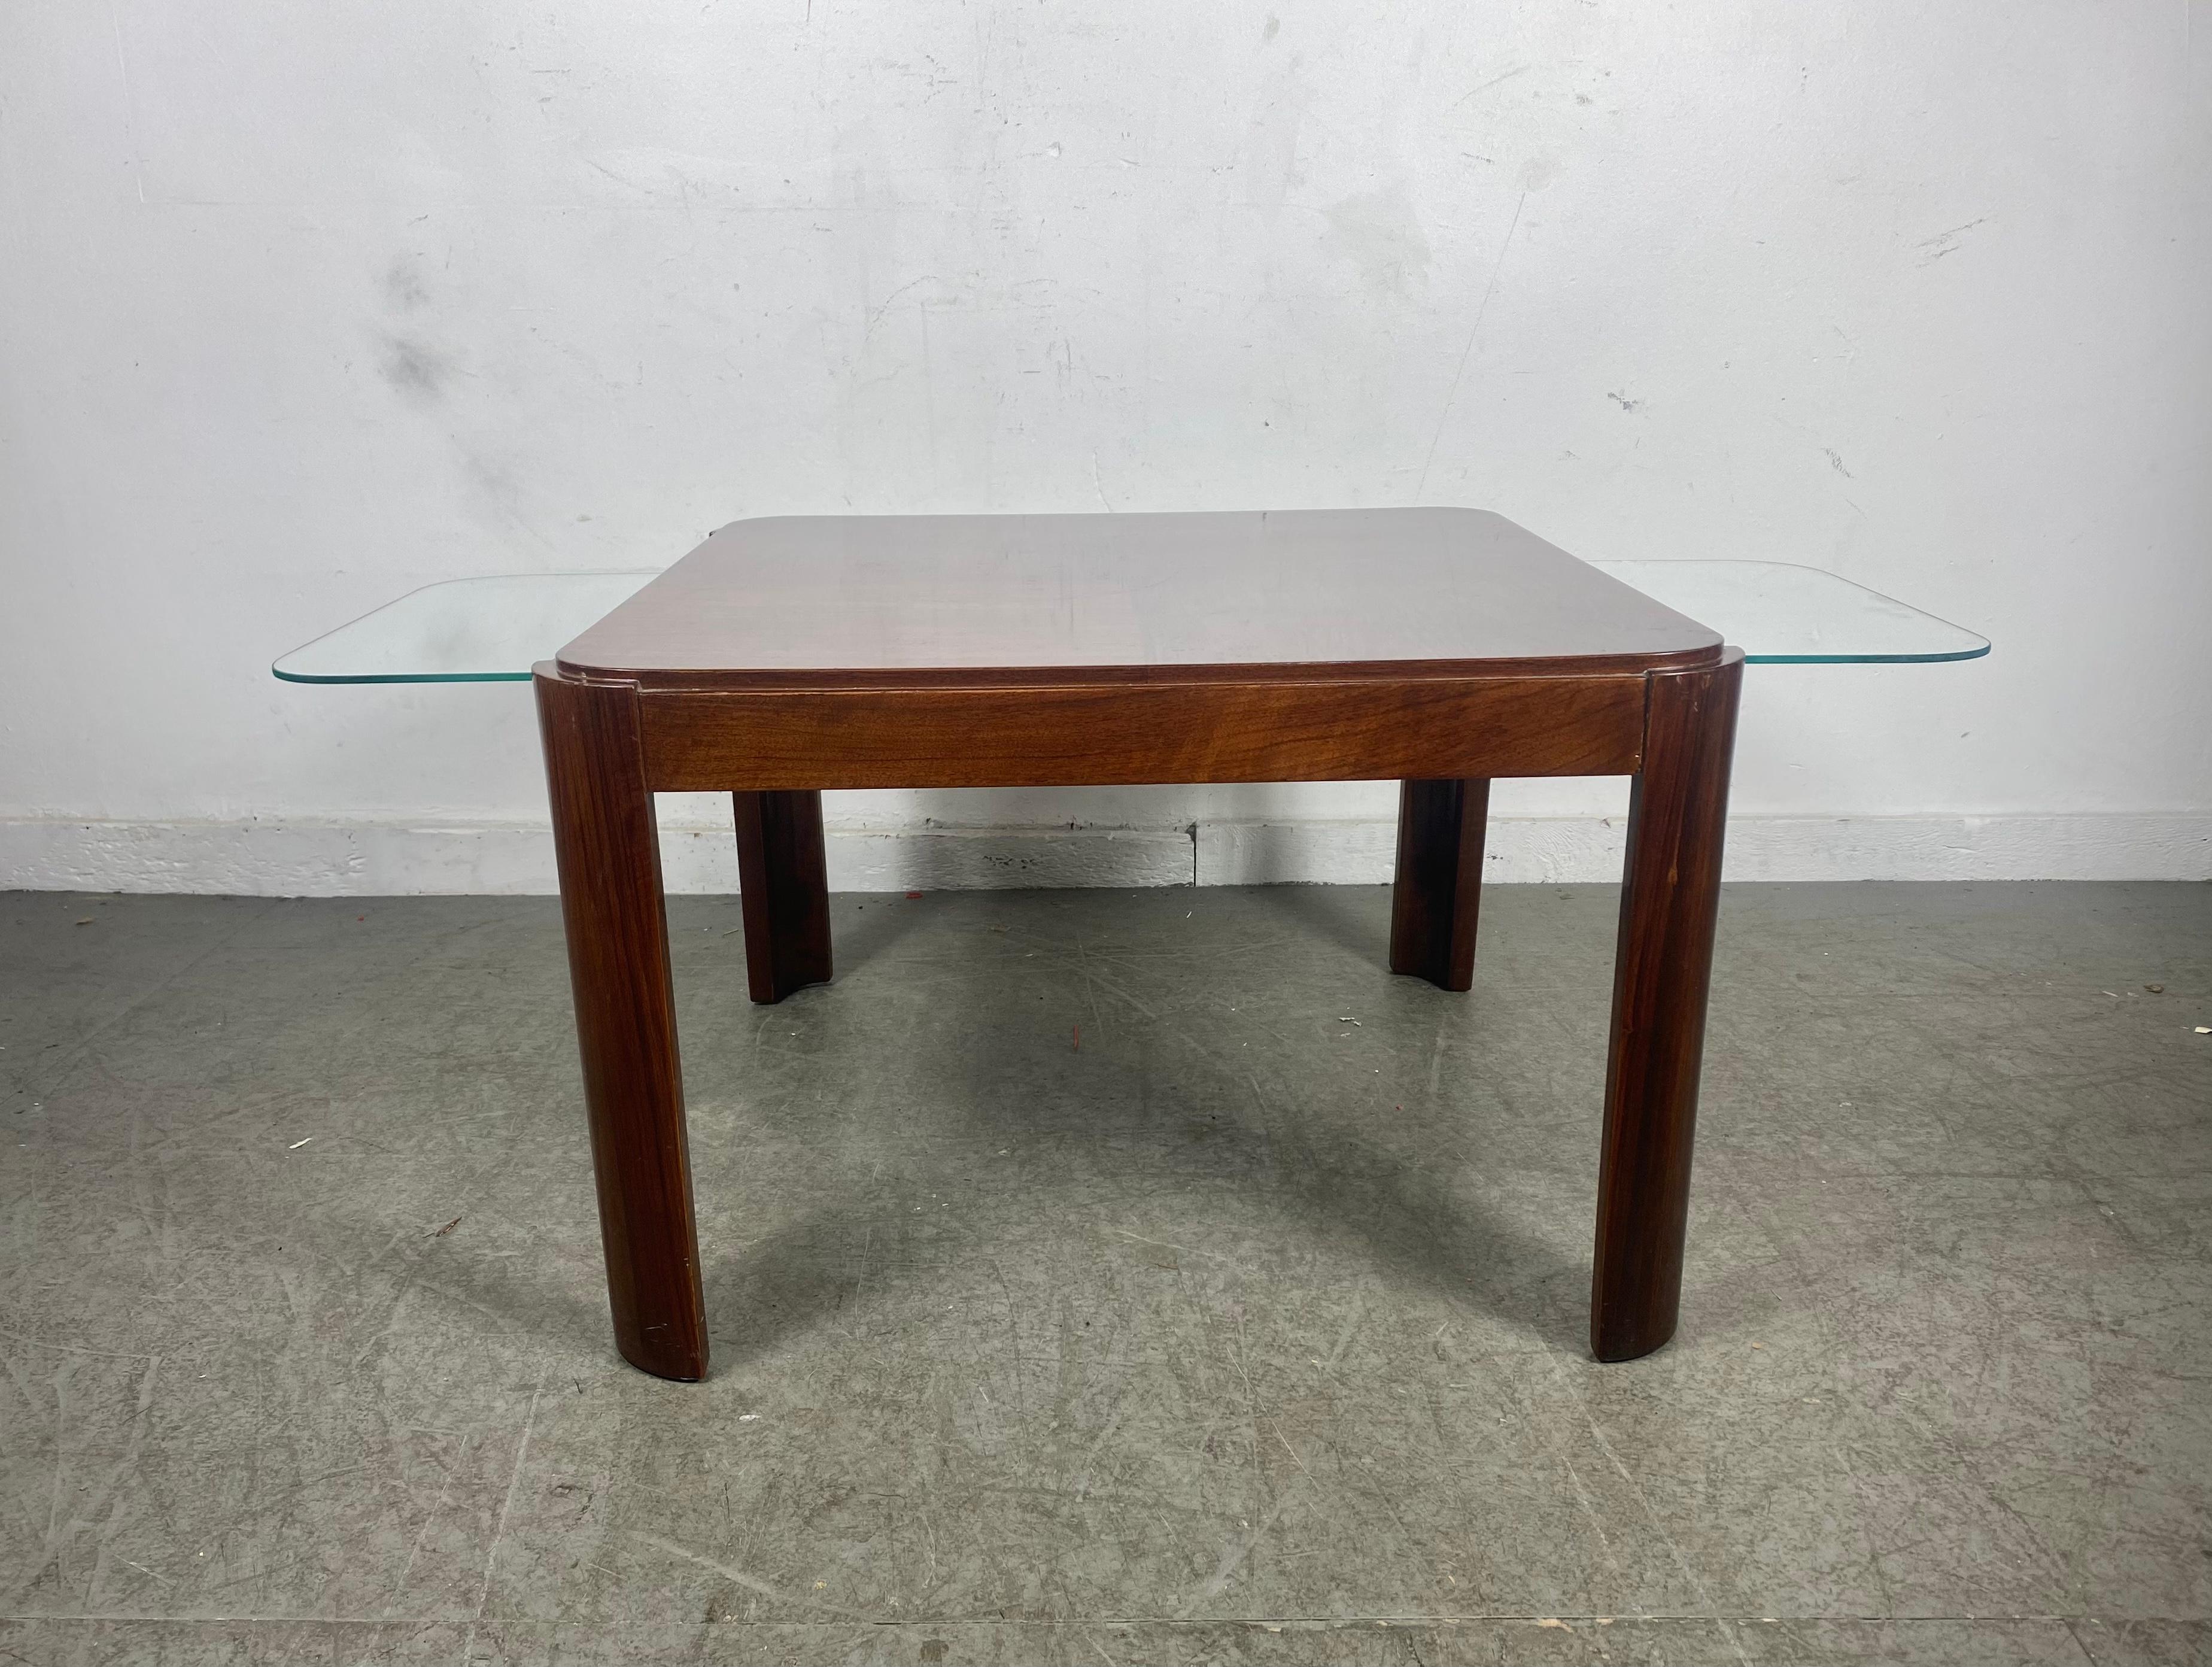 Unusual French Art Deco Rosewood Cocktail / Coffee Table, Classic Modernist Deco design,,Unusual pull out glass inserts,, Wonderful rosewood alternating pattern..Hand delivery avail to New York City or anywhere en route from Buffalo NY